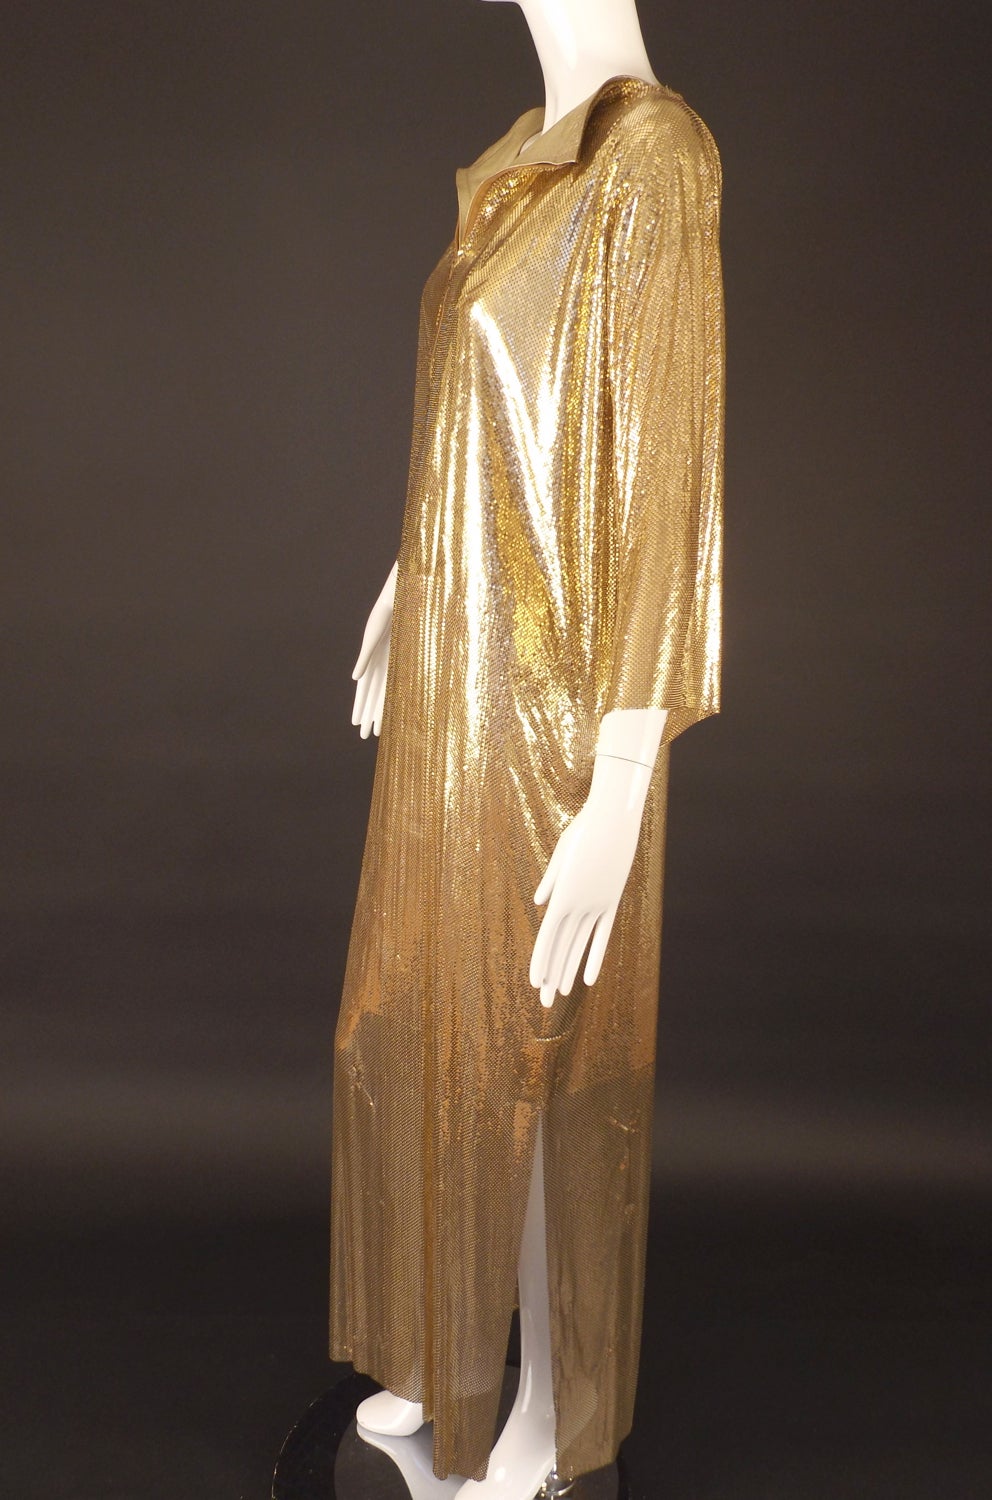 Amazing full length dress entirely made in gold metal mesh from the late 1970s/early 1980s. The dress has a zipper closure down the front of the chest and piped in gold leather lamé.  The dress has no lining or belt. Yes, it weighs a ton!